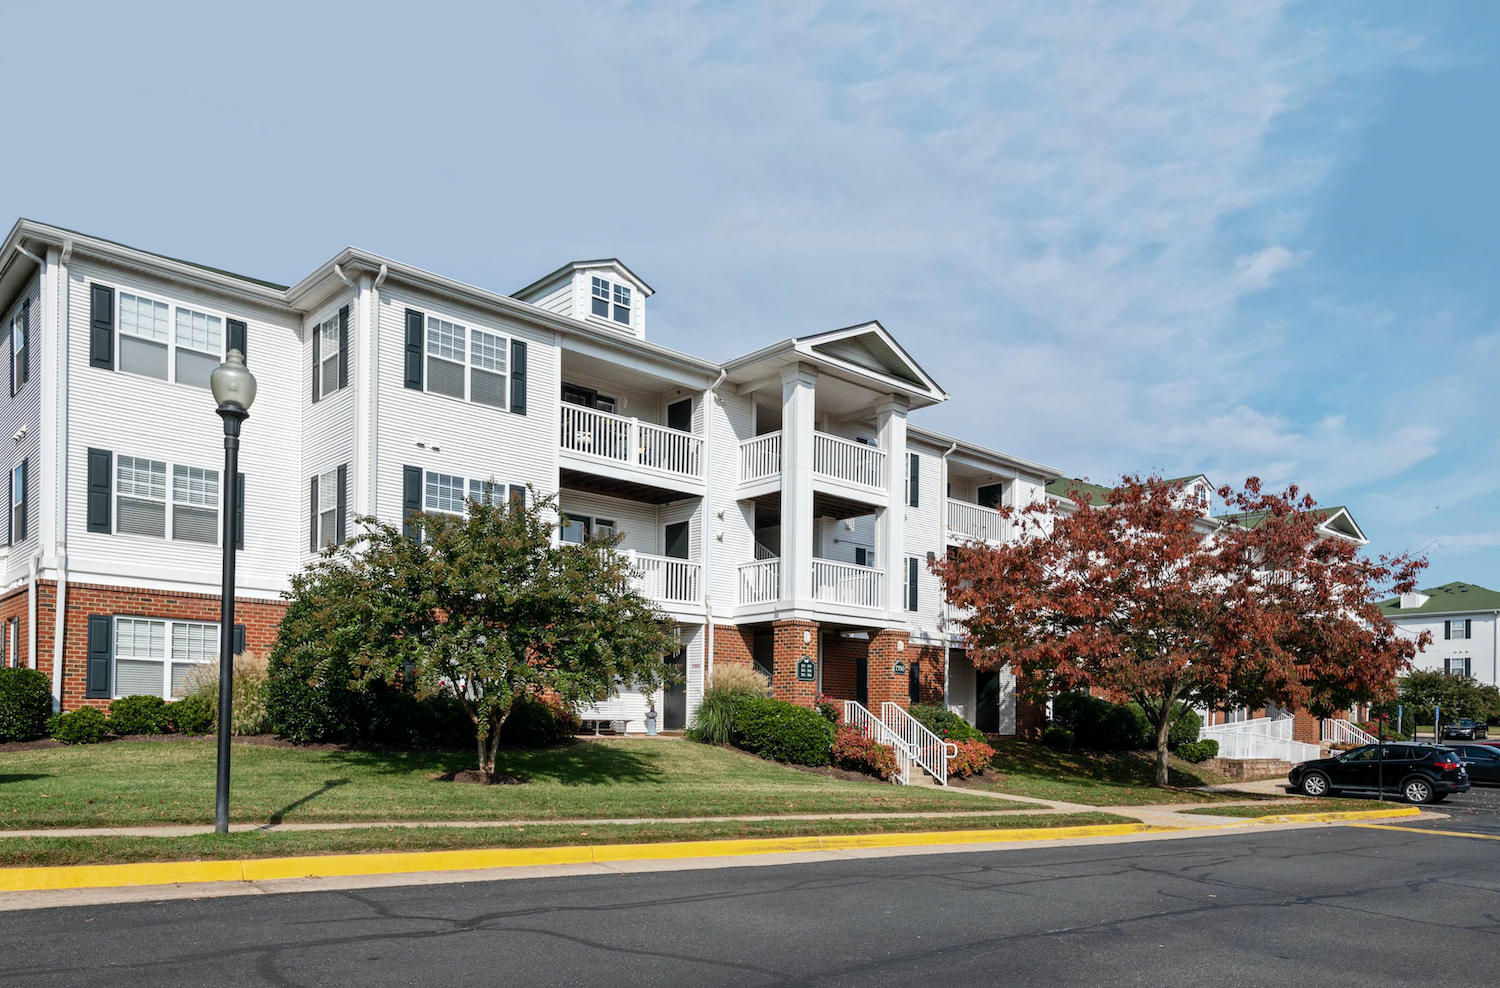 Capital Square 1031 Buys Multifamily Property Near Washington D.C. for DST Offering